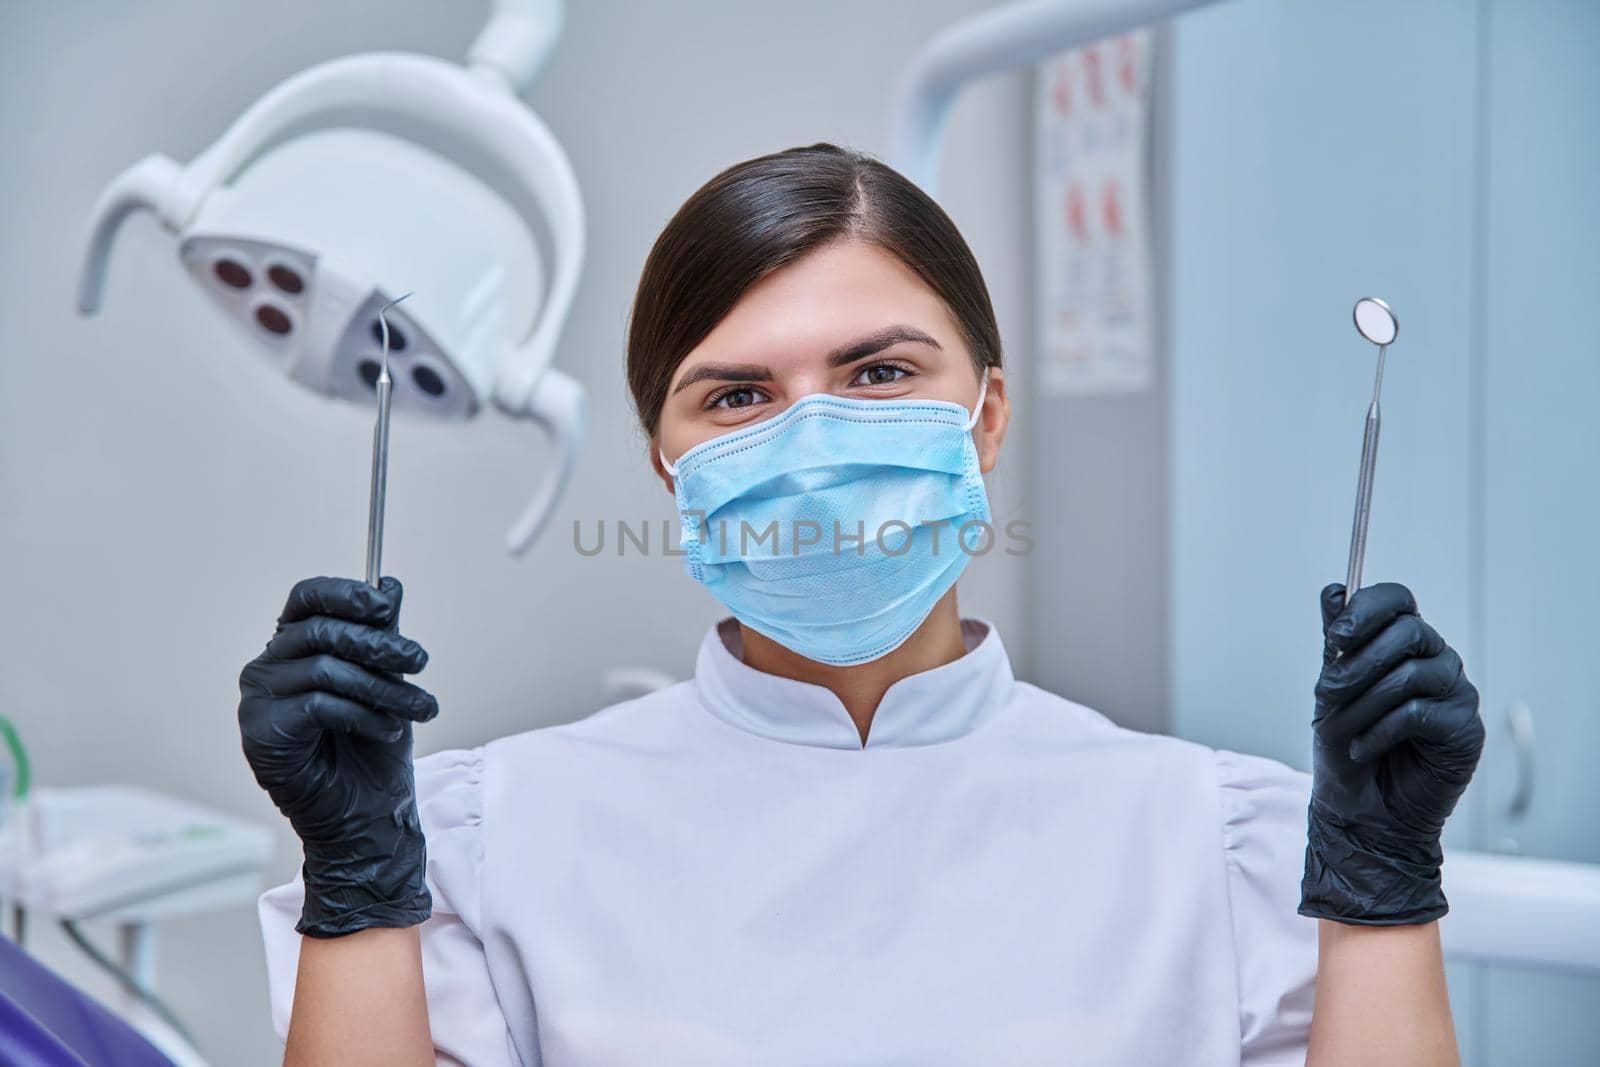 Headshot portrait of female dentist wearing facial mask with instruments for examining teeth. Doctor looking at camera, posing in dental office. Dentistry, medicine, treatment, dental health care